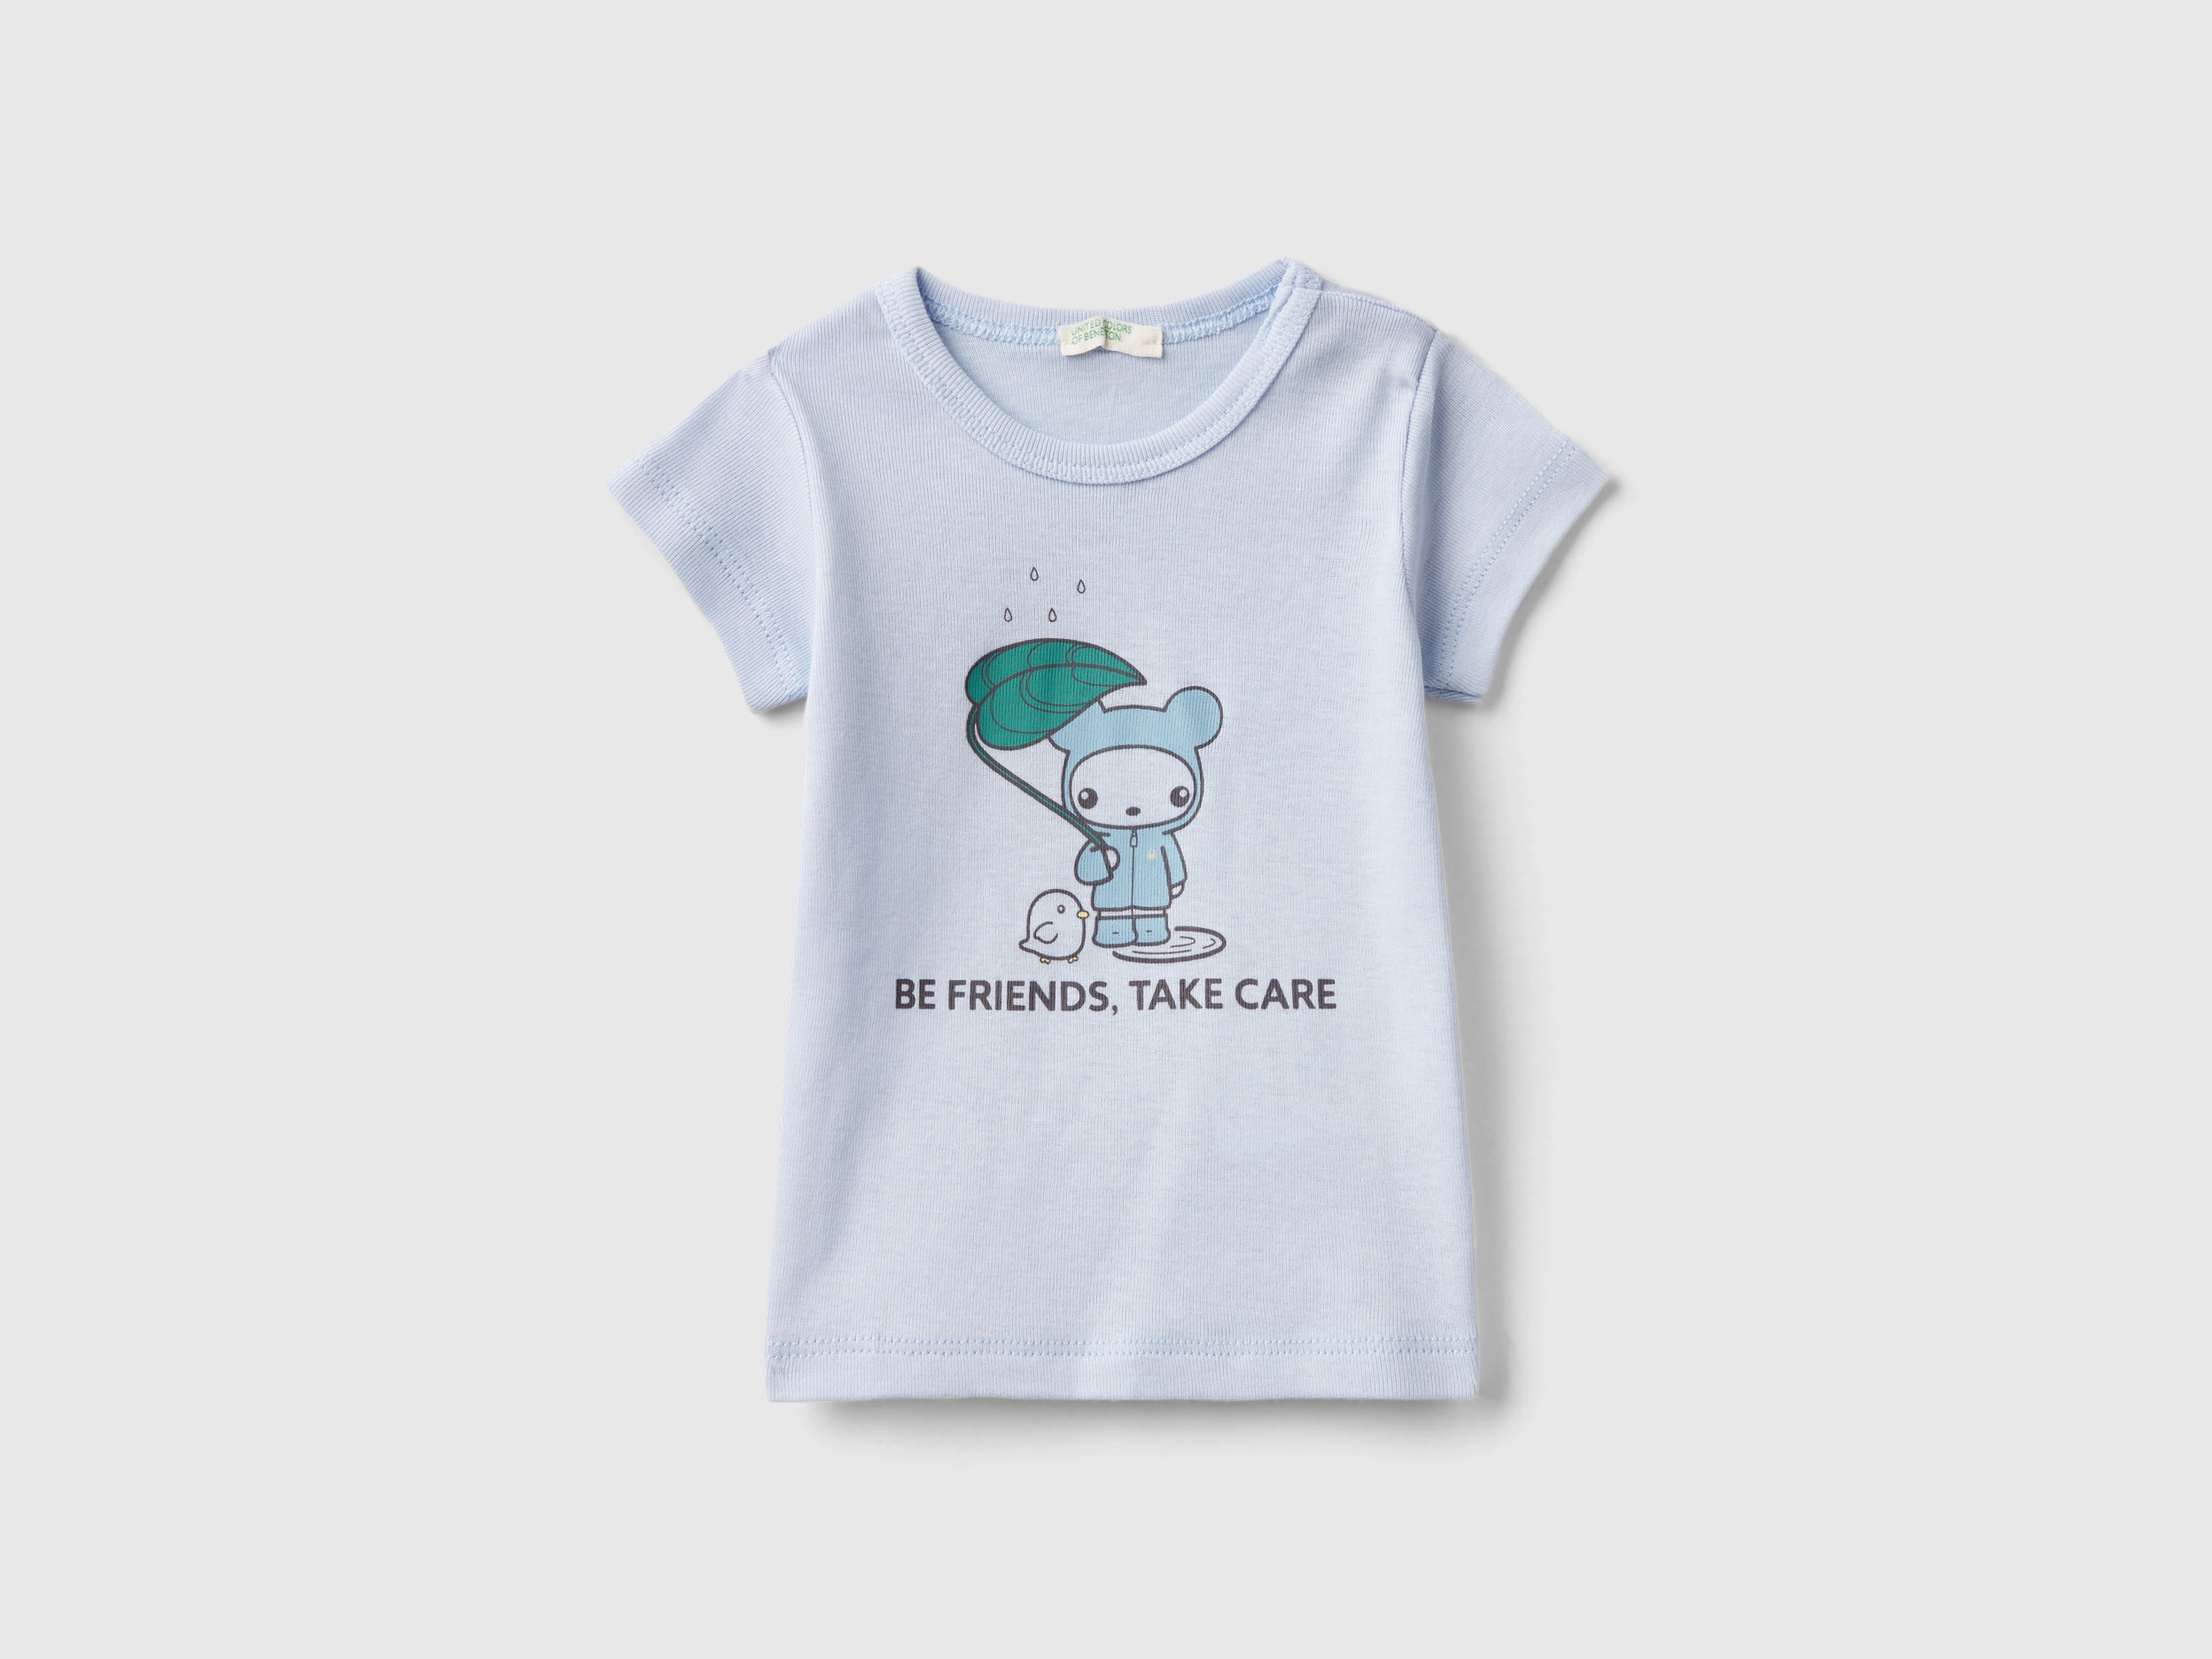 Image of Benetton, T-shirt In 100% Organic Cotton, size 68, Sky Blue, Kids